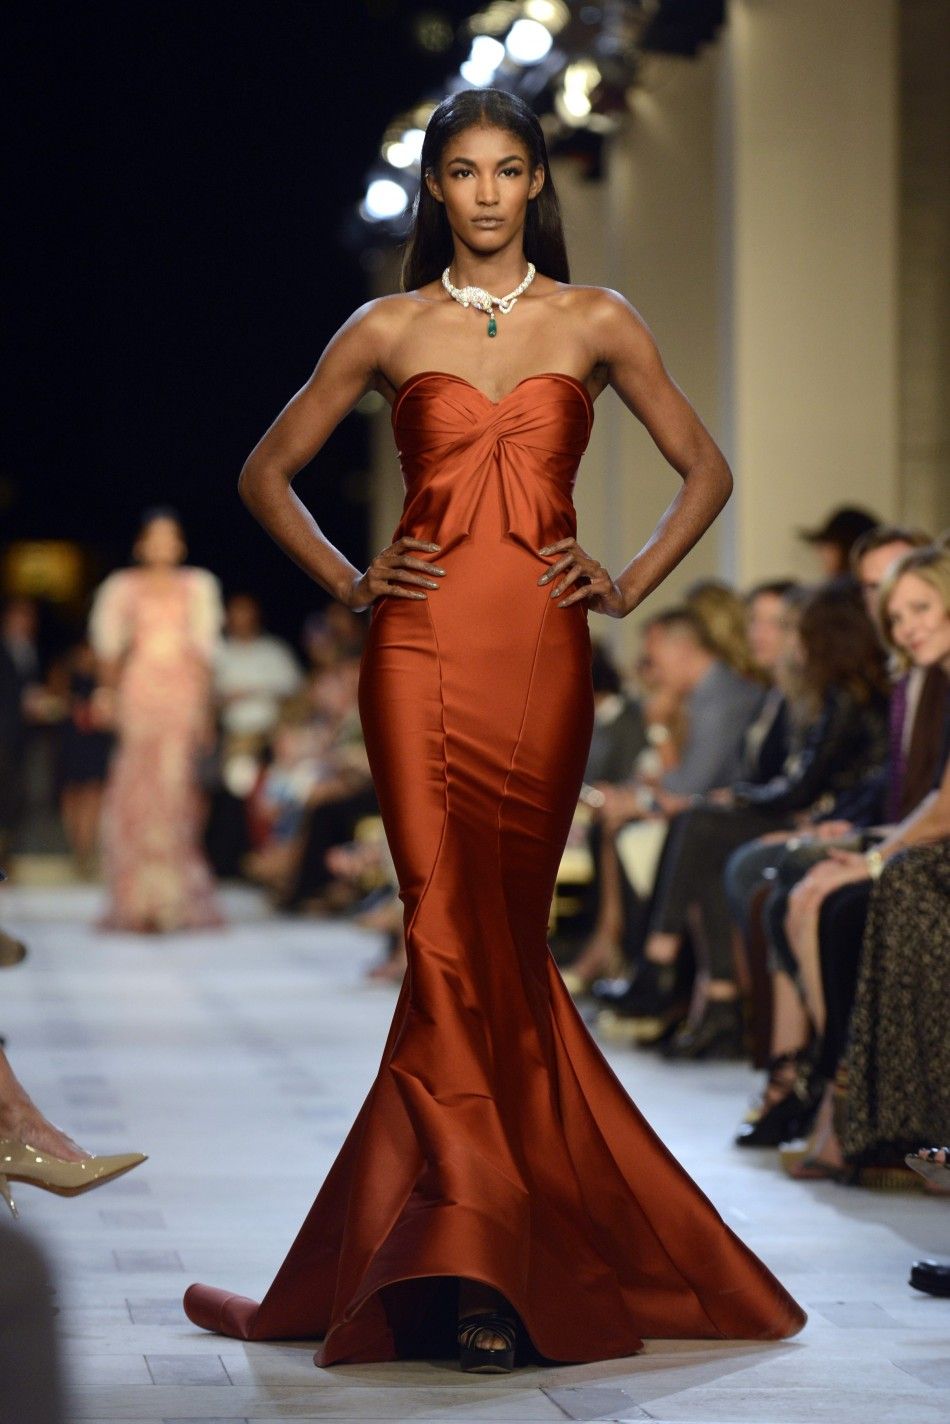 Zac Posen Spring 2013 collection at Mercedes-Benz Fashion Week in New York at Avery Fisher Hall, Sept. 9, 2012